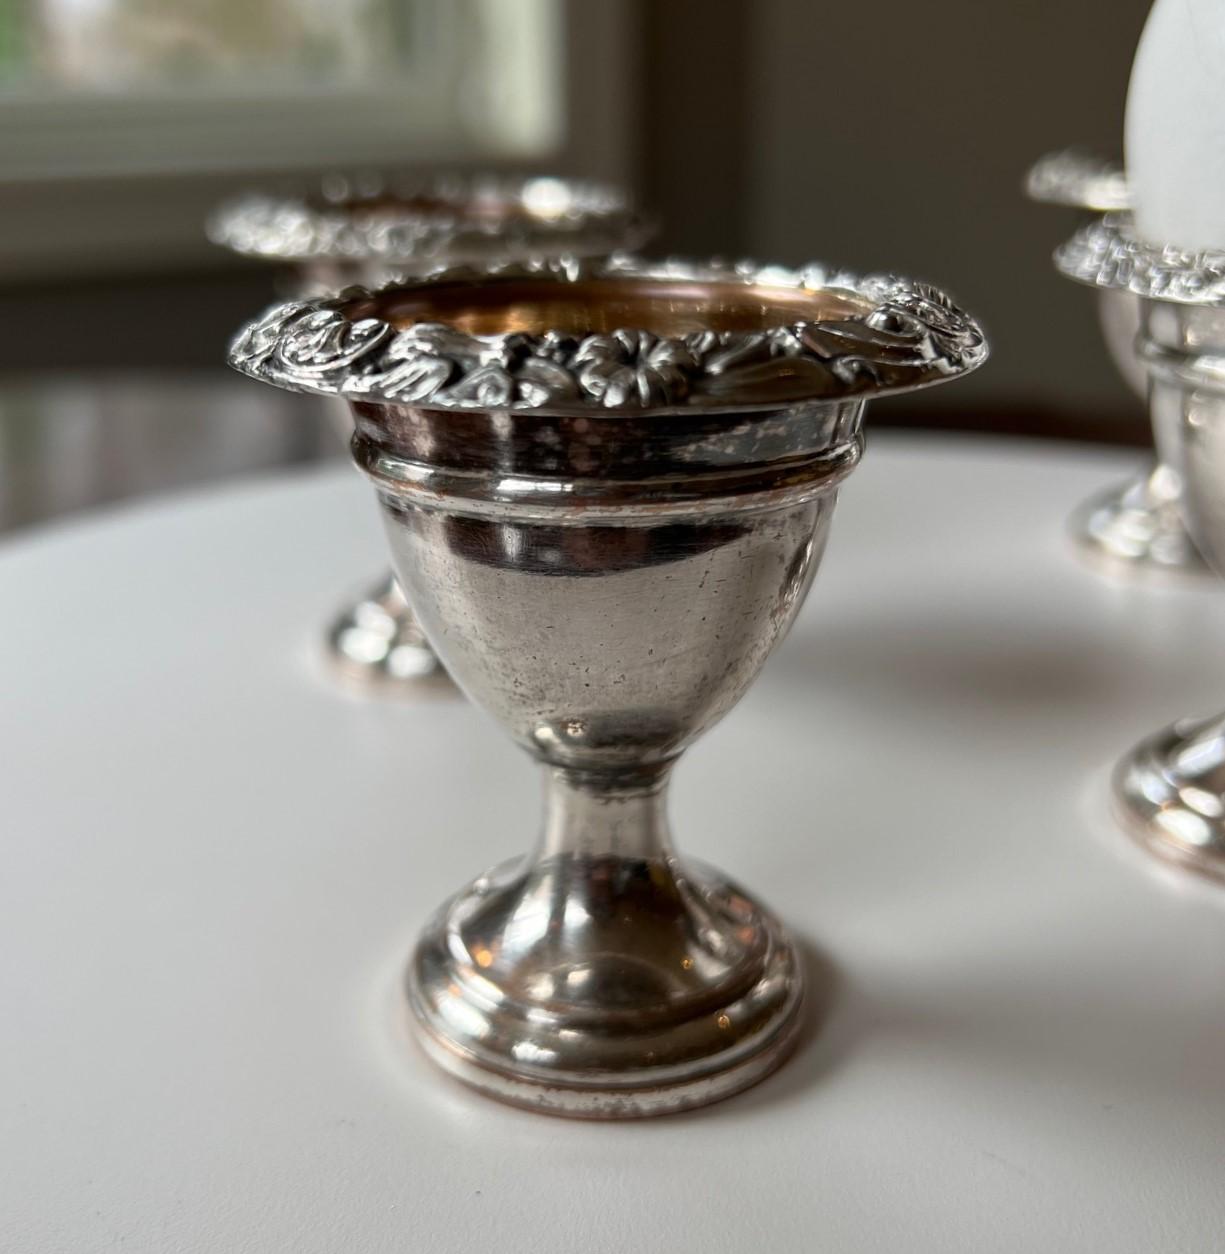 Antique Silverplate and Gilt Egg Cups - Set of 4 In Good Condition For Sale In Morristown, NJ